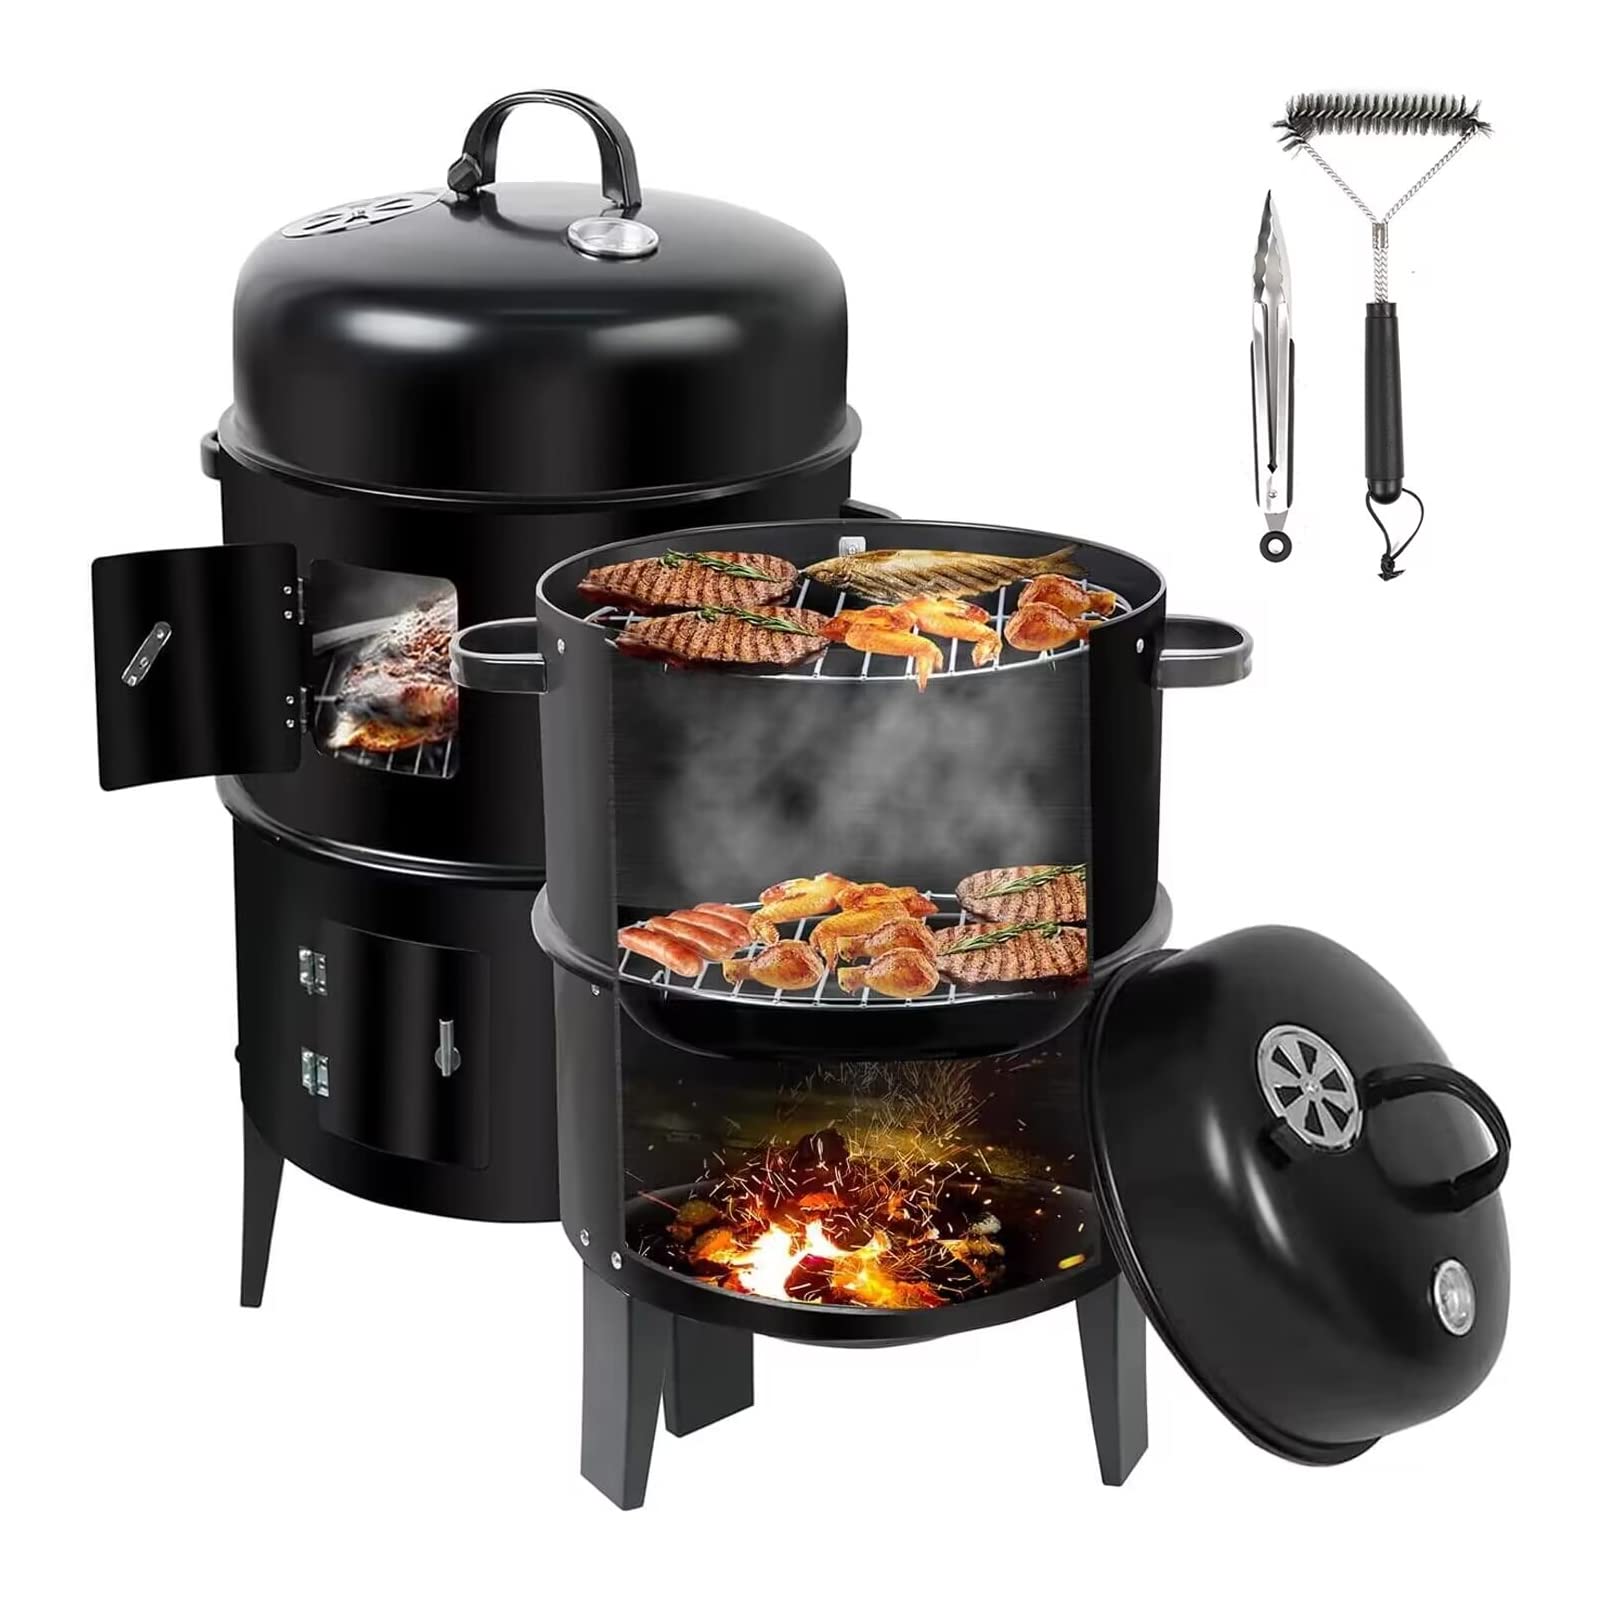 ZXMT 17 Inch Vertical Multi-Layer Steel Charcoal Smoker